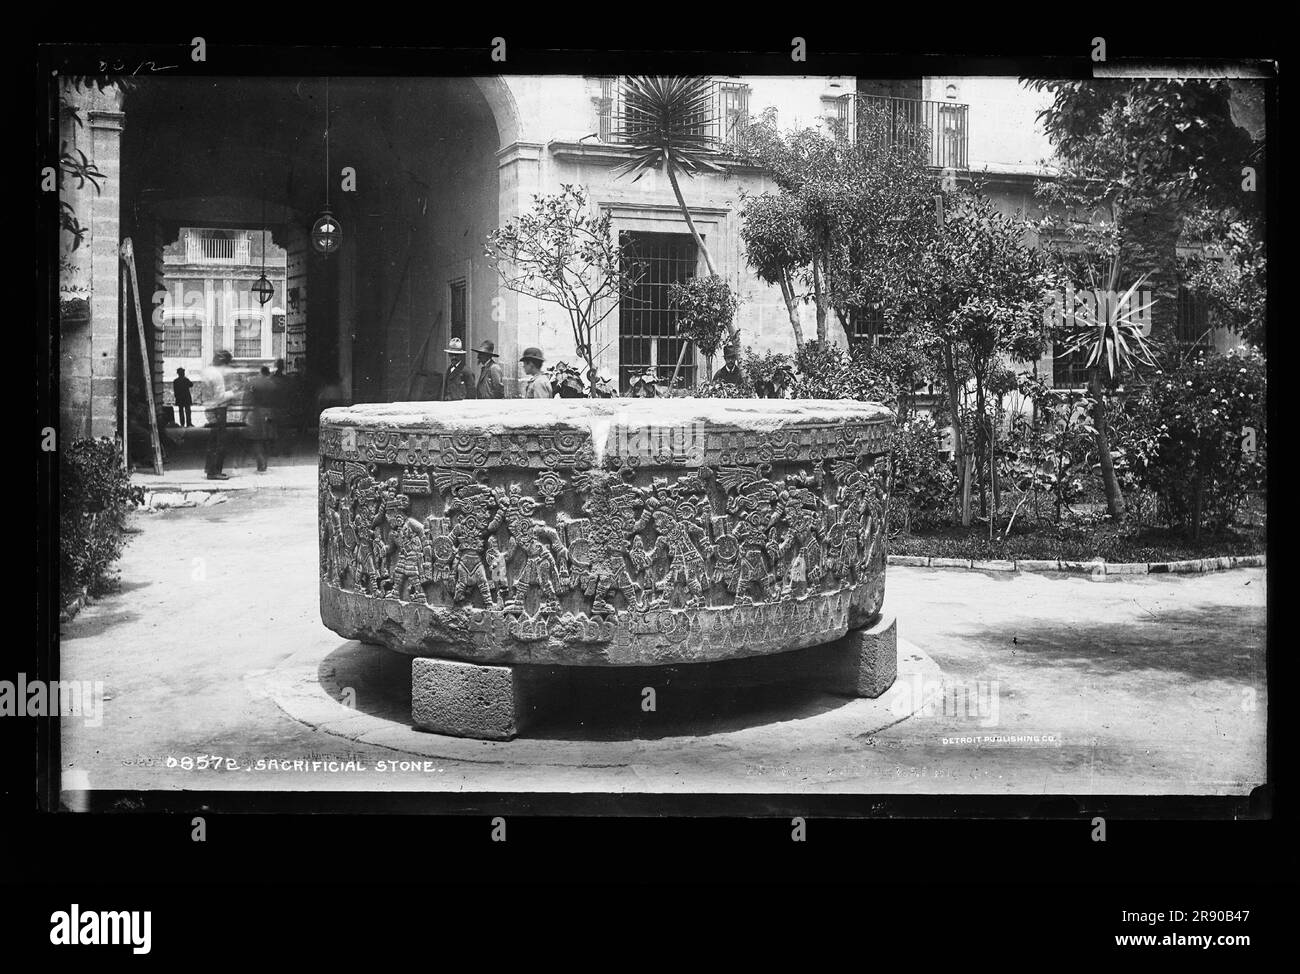 Sacrificial stone, between 1880 and 1897. Showing the Stone of Tizoc when it was located in the former National Musueum in the patio of north wing of the National Palace. Stock Photo